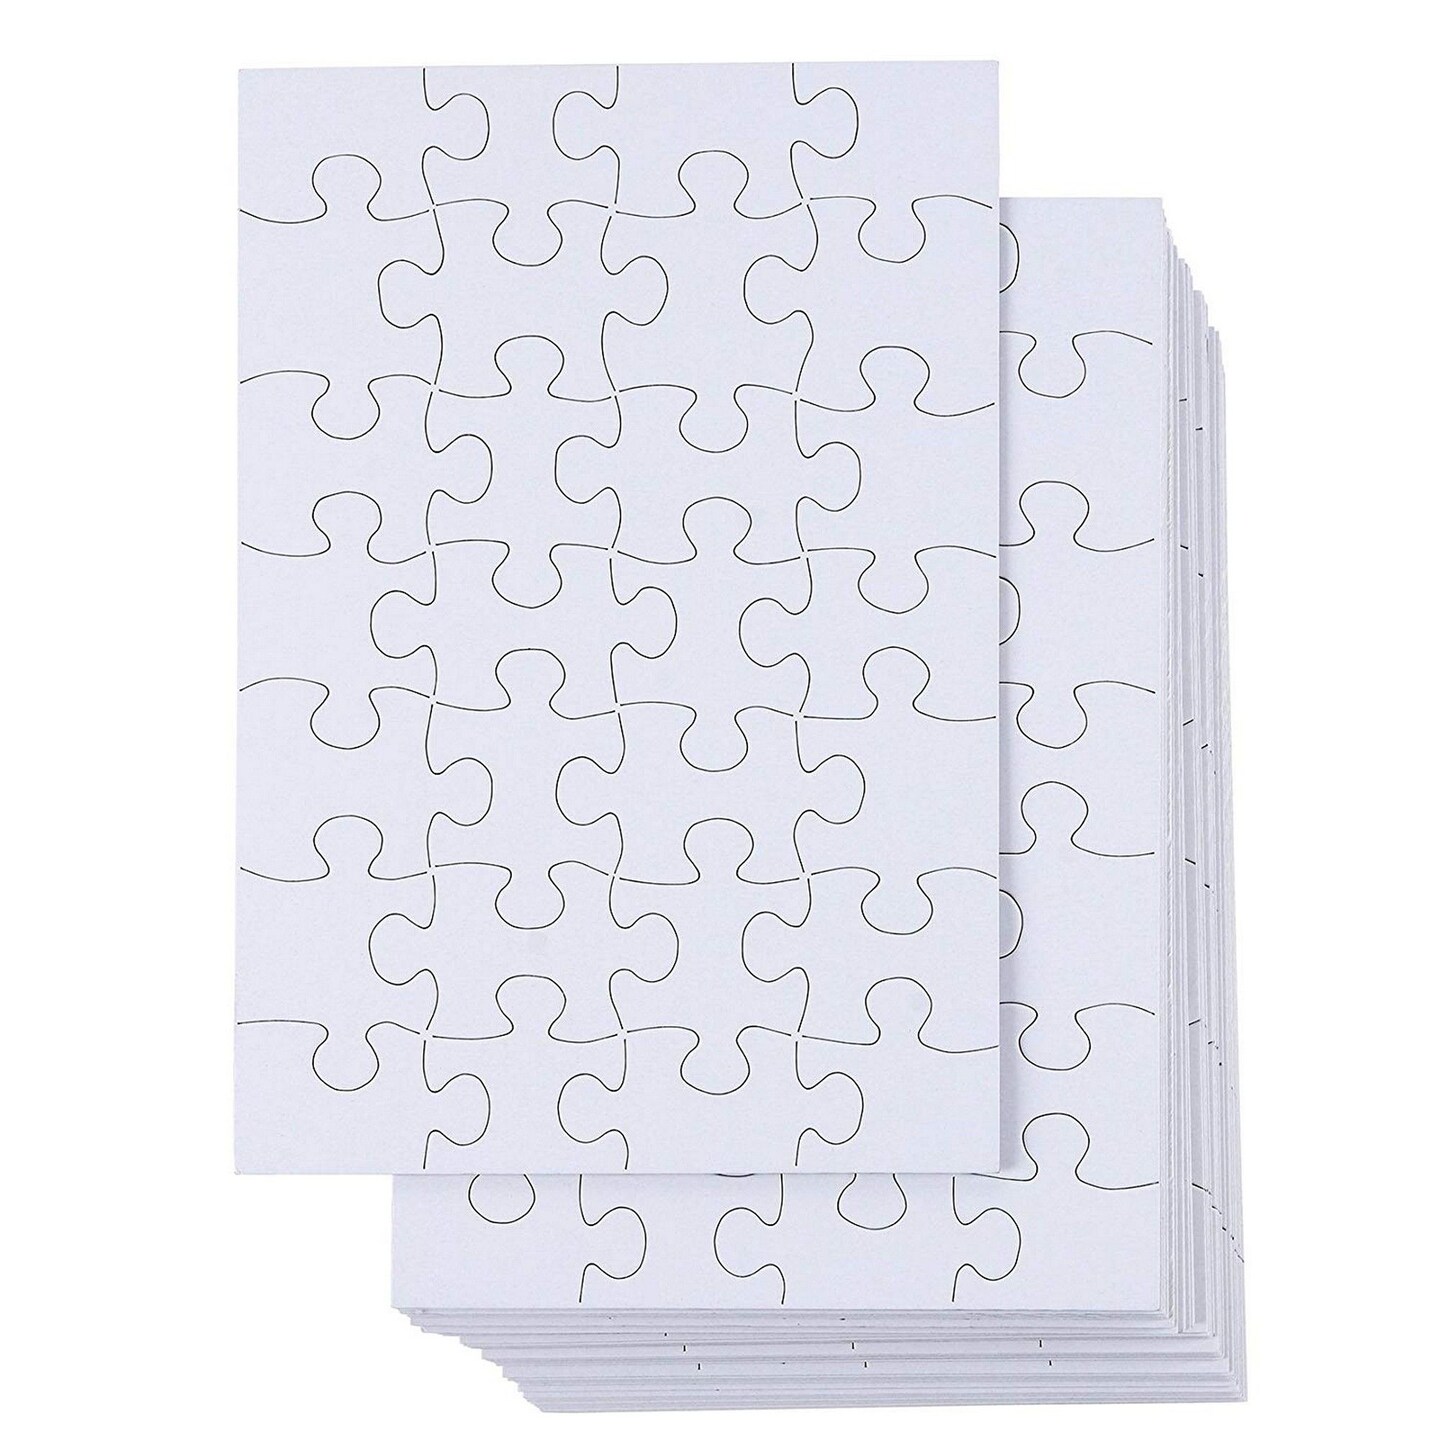 48 Sheets Blank Puzzles to Draw On Bulk &#x2013; 6x8 inch Make Your Own Jigsaw Puzzle for Kids Crafts Projects (28 Pieces Each)